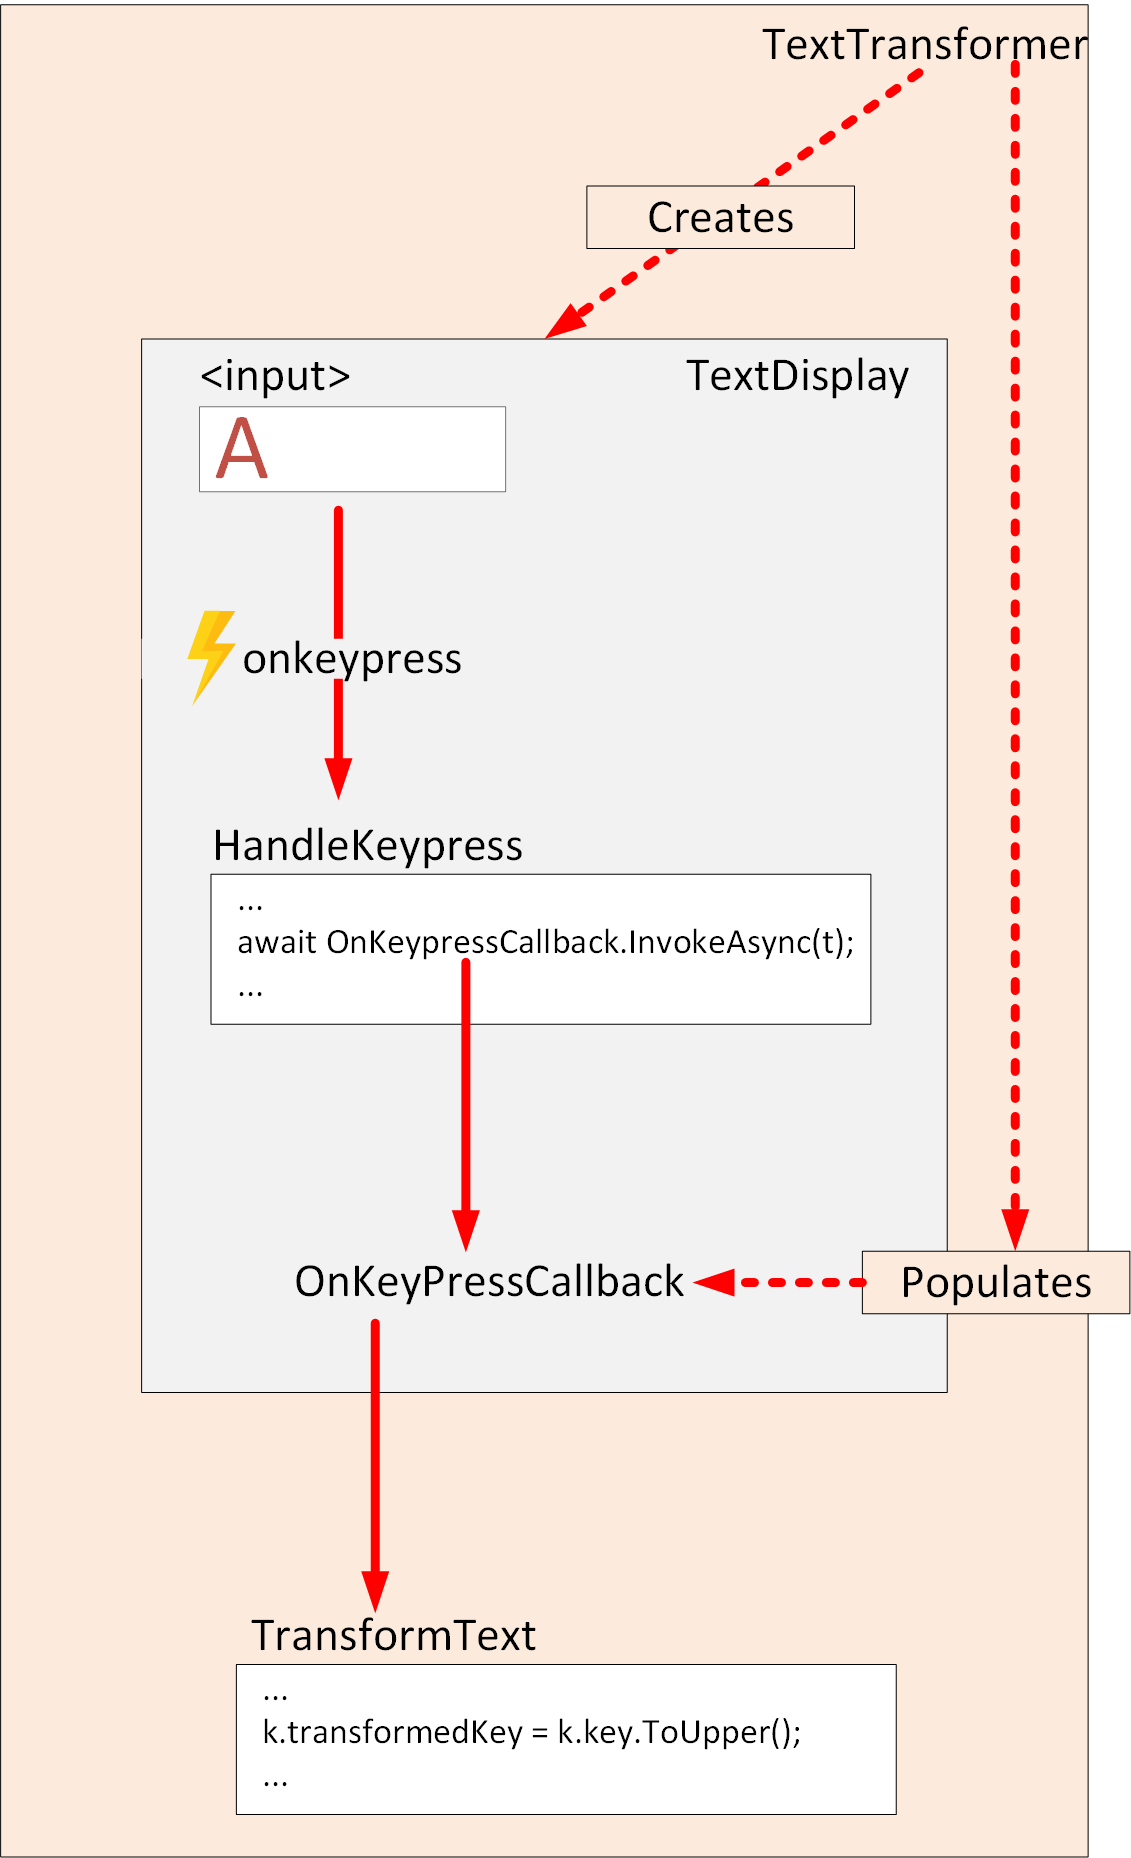 Diagram of the flow of control with an EventCallback in a child component.